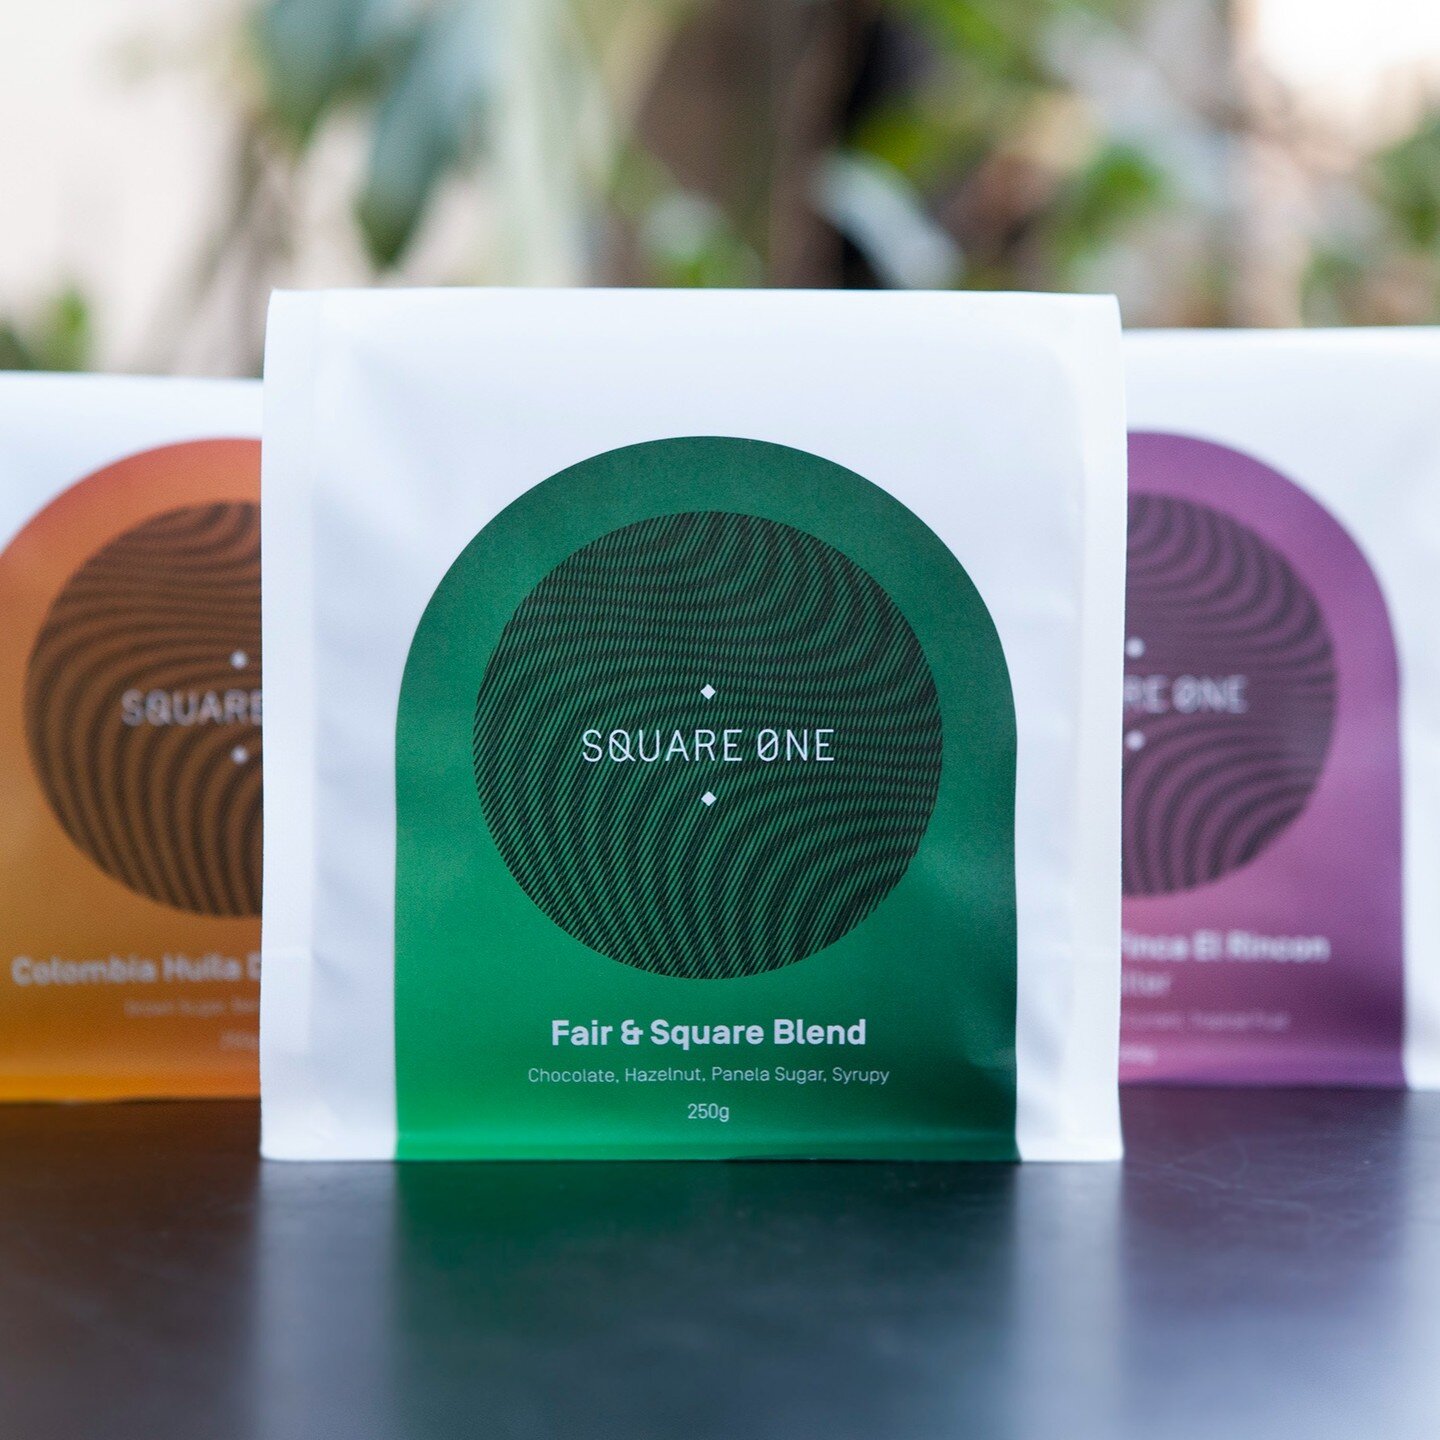 New packaging looking fresh! 🔥
Square One coffee beans available in take-home bags, ground to order. Find them on the shelf at Square One Rialto or online at our link in bio.

#squareonecoffeeroasters #squareonerialto #themulberrygroup